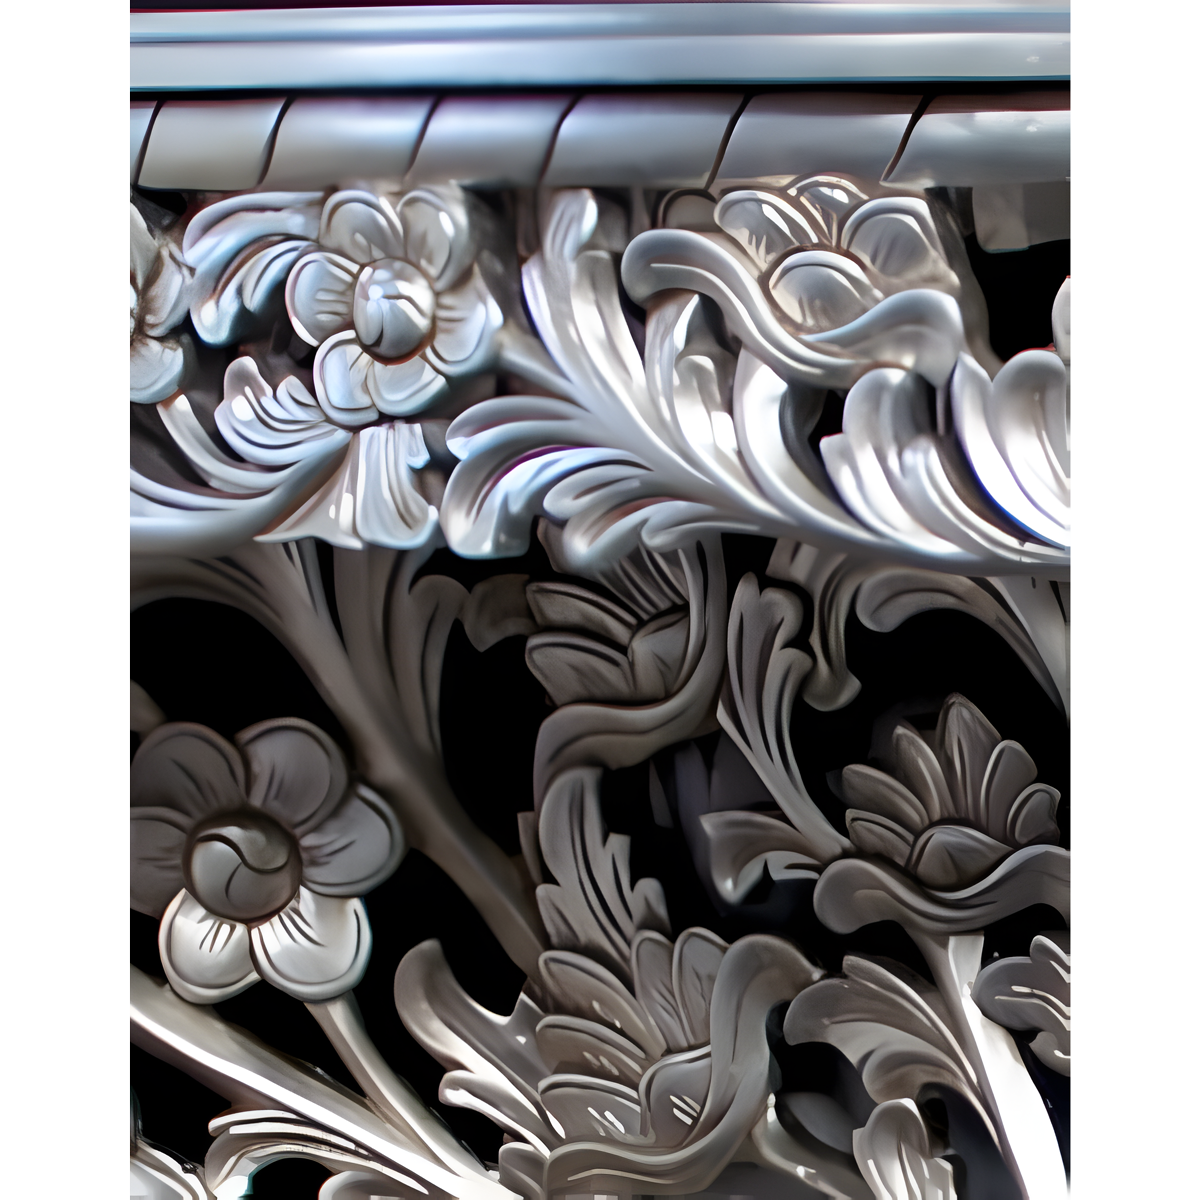 Bouquet De Fleur Silver Leaf Hall Console Table Flower Carved Mahogany Also In Gold 5 - Hampshire Barn Interiors - Bouquet De Fleur Silver Leaf Hall Console Table Flower Carved Mahogany ( Also In Gold) -